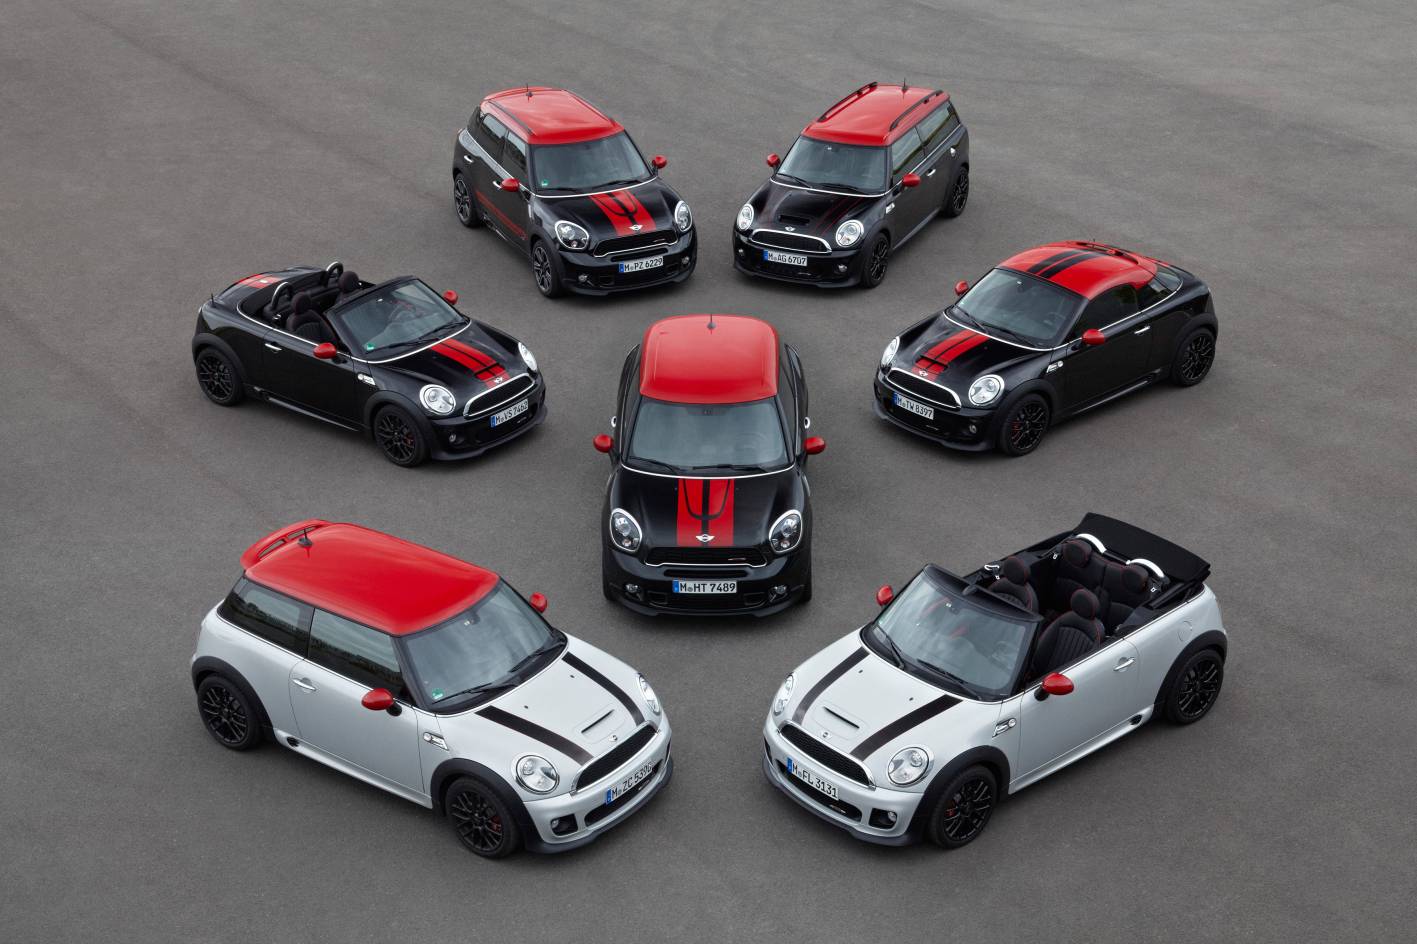 2015 MINI John Cooper Works to offer 172kW – report